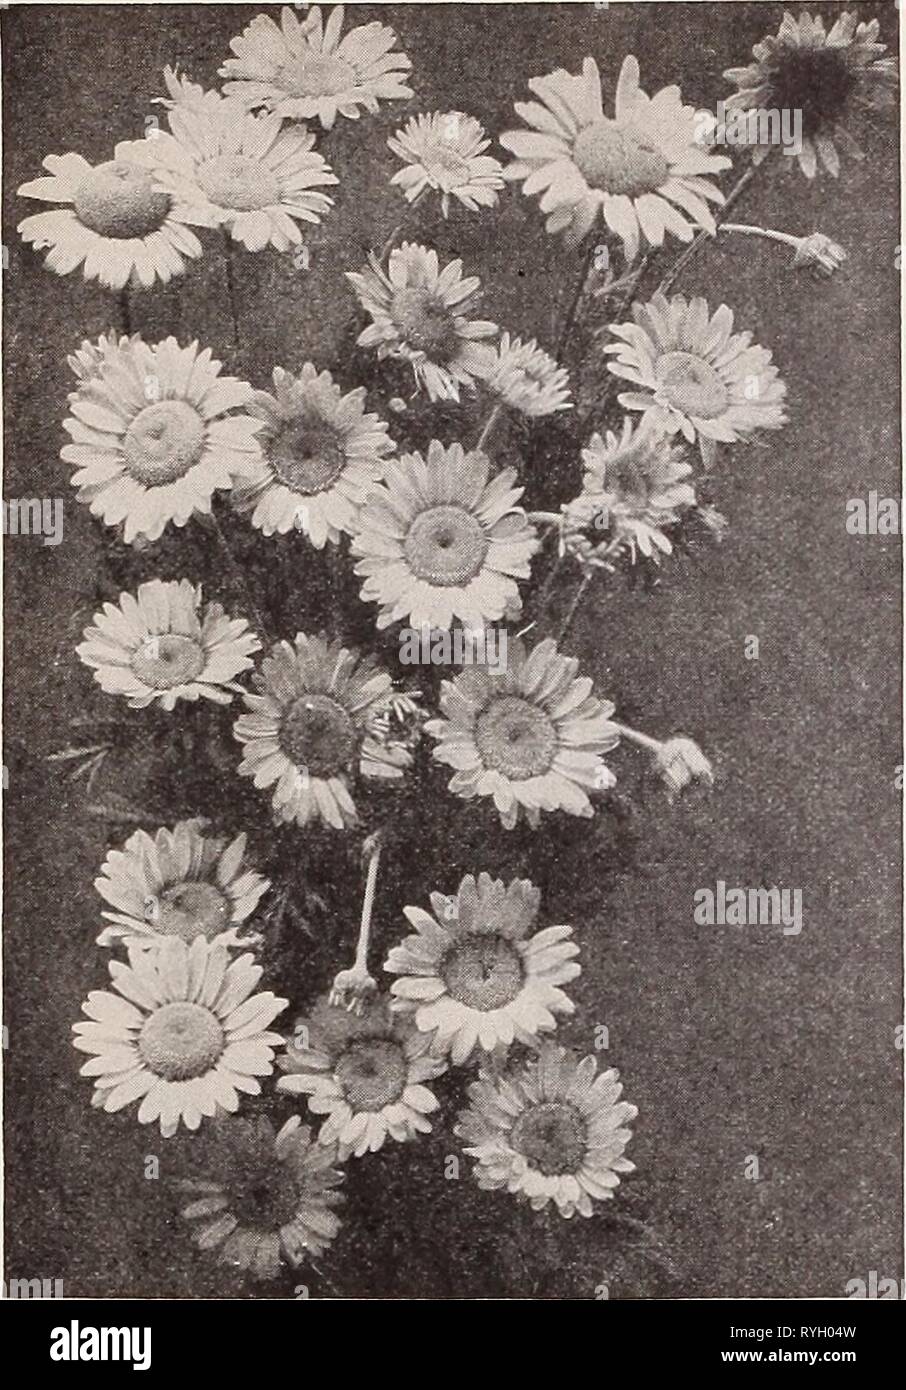 Dreer's wholesale price list for florists : special spring edition  dreerswholesalep1932henr 2 Year: 1932  62 HENRY A. DREER Hardy Plants WHOLESALE LIST    Anthemis Tinctoria Perry's Variety Anthemis Tinctoria Perry's Variety (Golden Marguerite) A wonderful improvement over the well-known Golden Marguerite Anthemis Tinctoria, easily grown in any ordinary border producing its large, nearly 3 inch across, well-shaped flowers from June to October. The well proportioned bushes with delicate fern-like foliage are most attractive and become covered with bright golden-yellow flowers which are valuabl Stock Photo